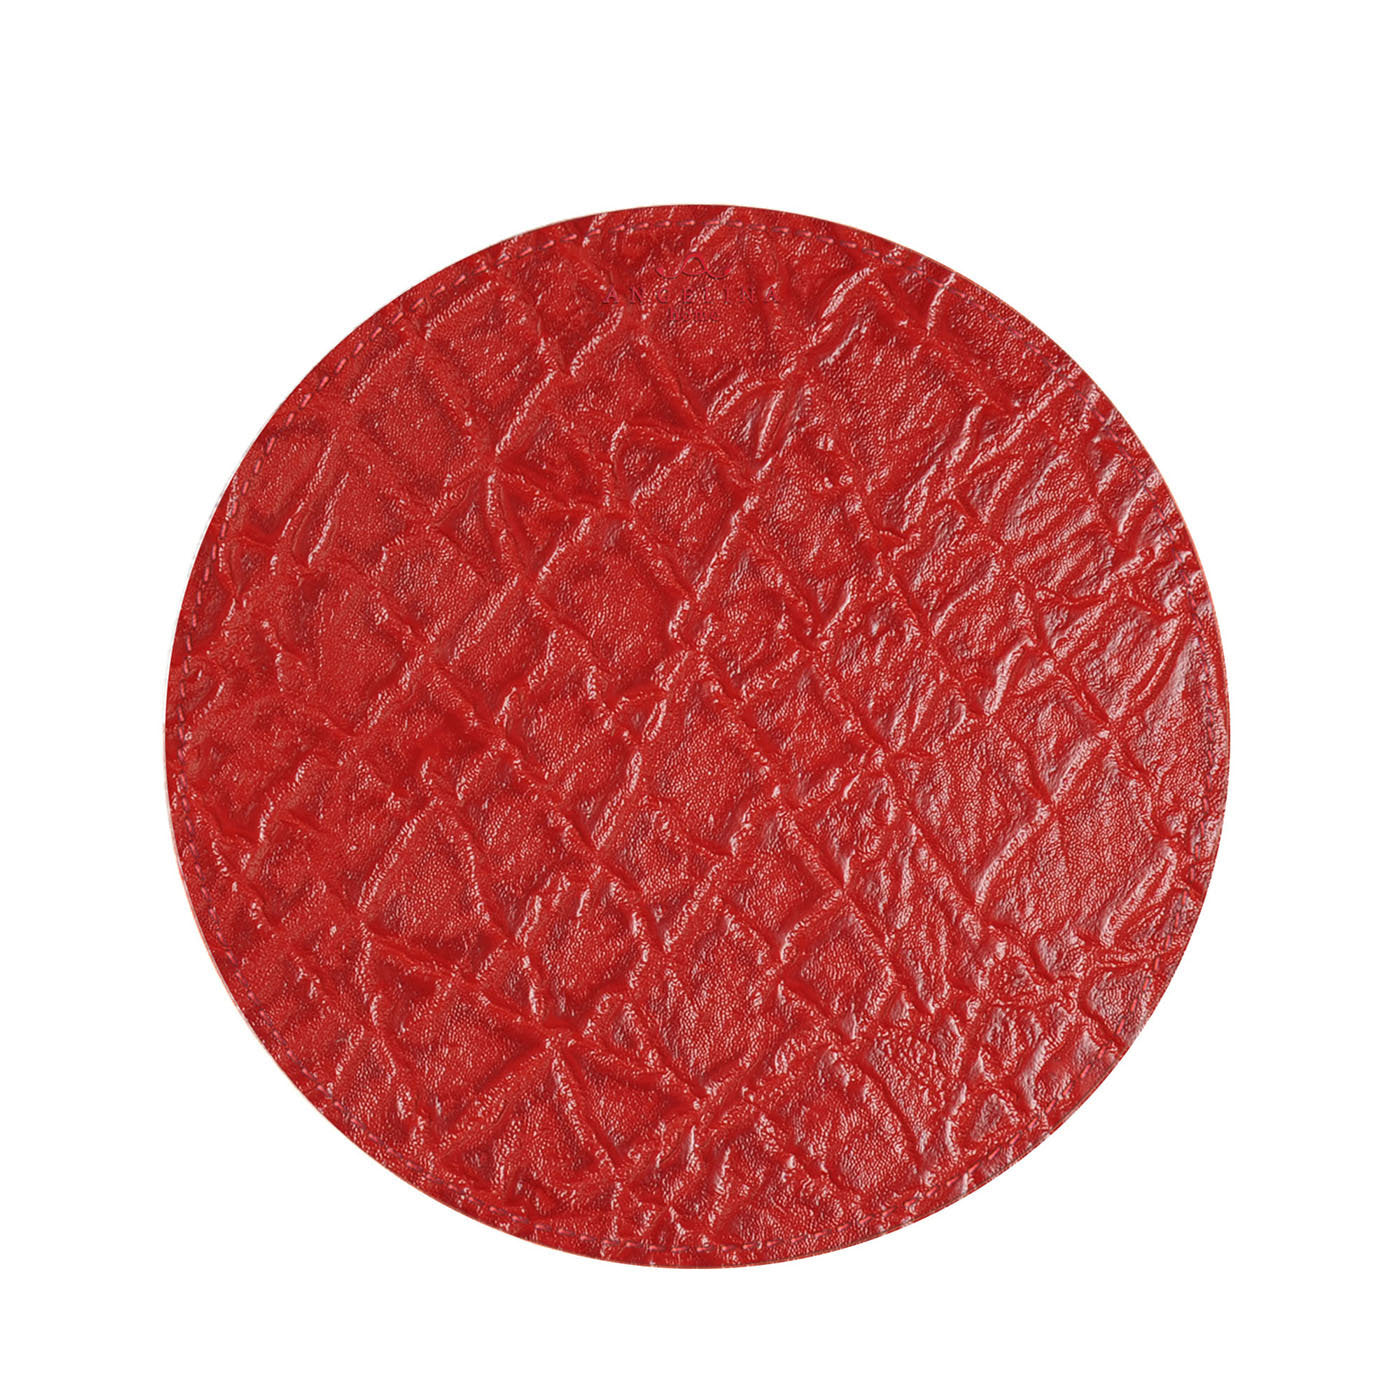 Tanzania Small Set of 2 Round Red Leather Placemats - Alternative view 2